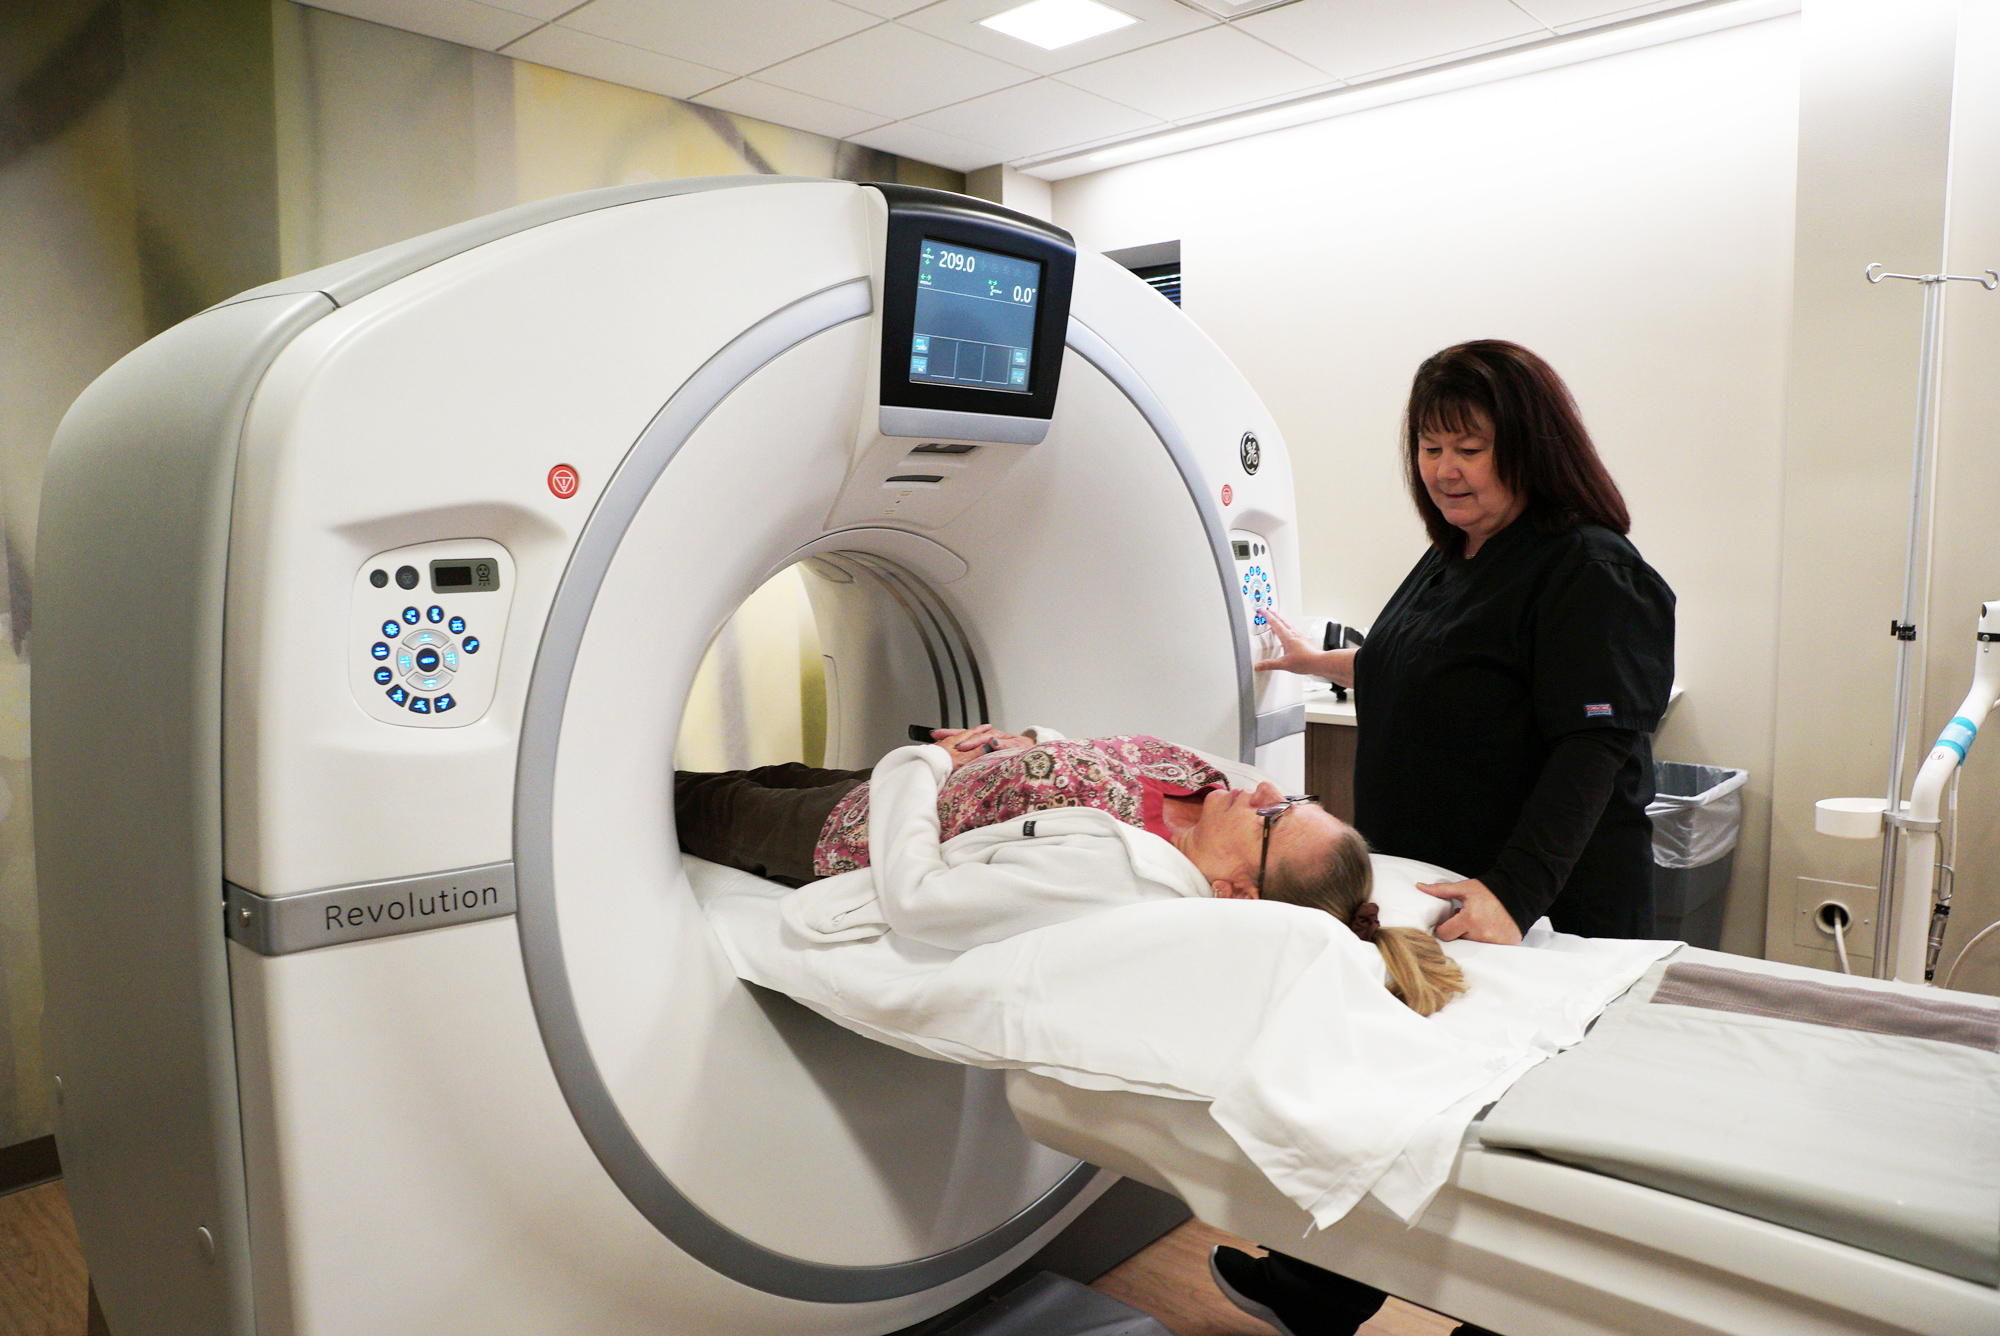 CT Scan at Wisconsin Imaging Center of Excellence